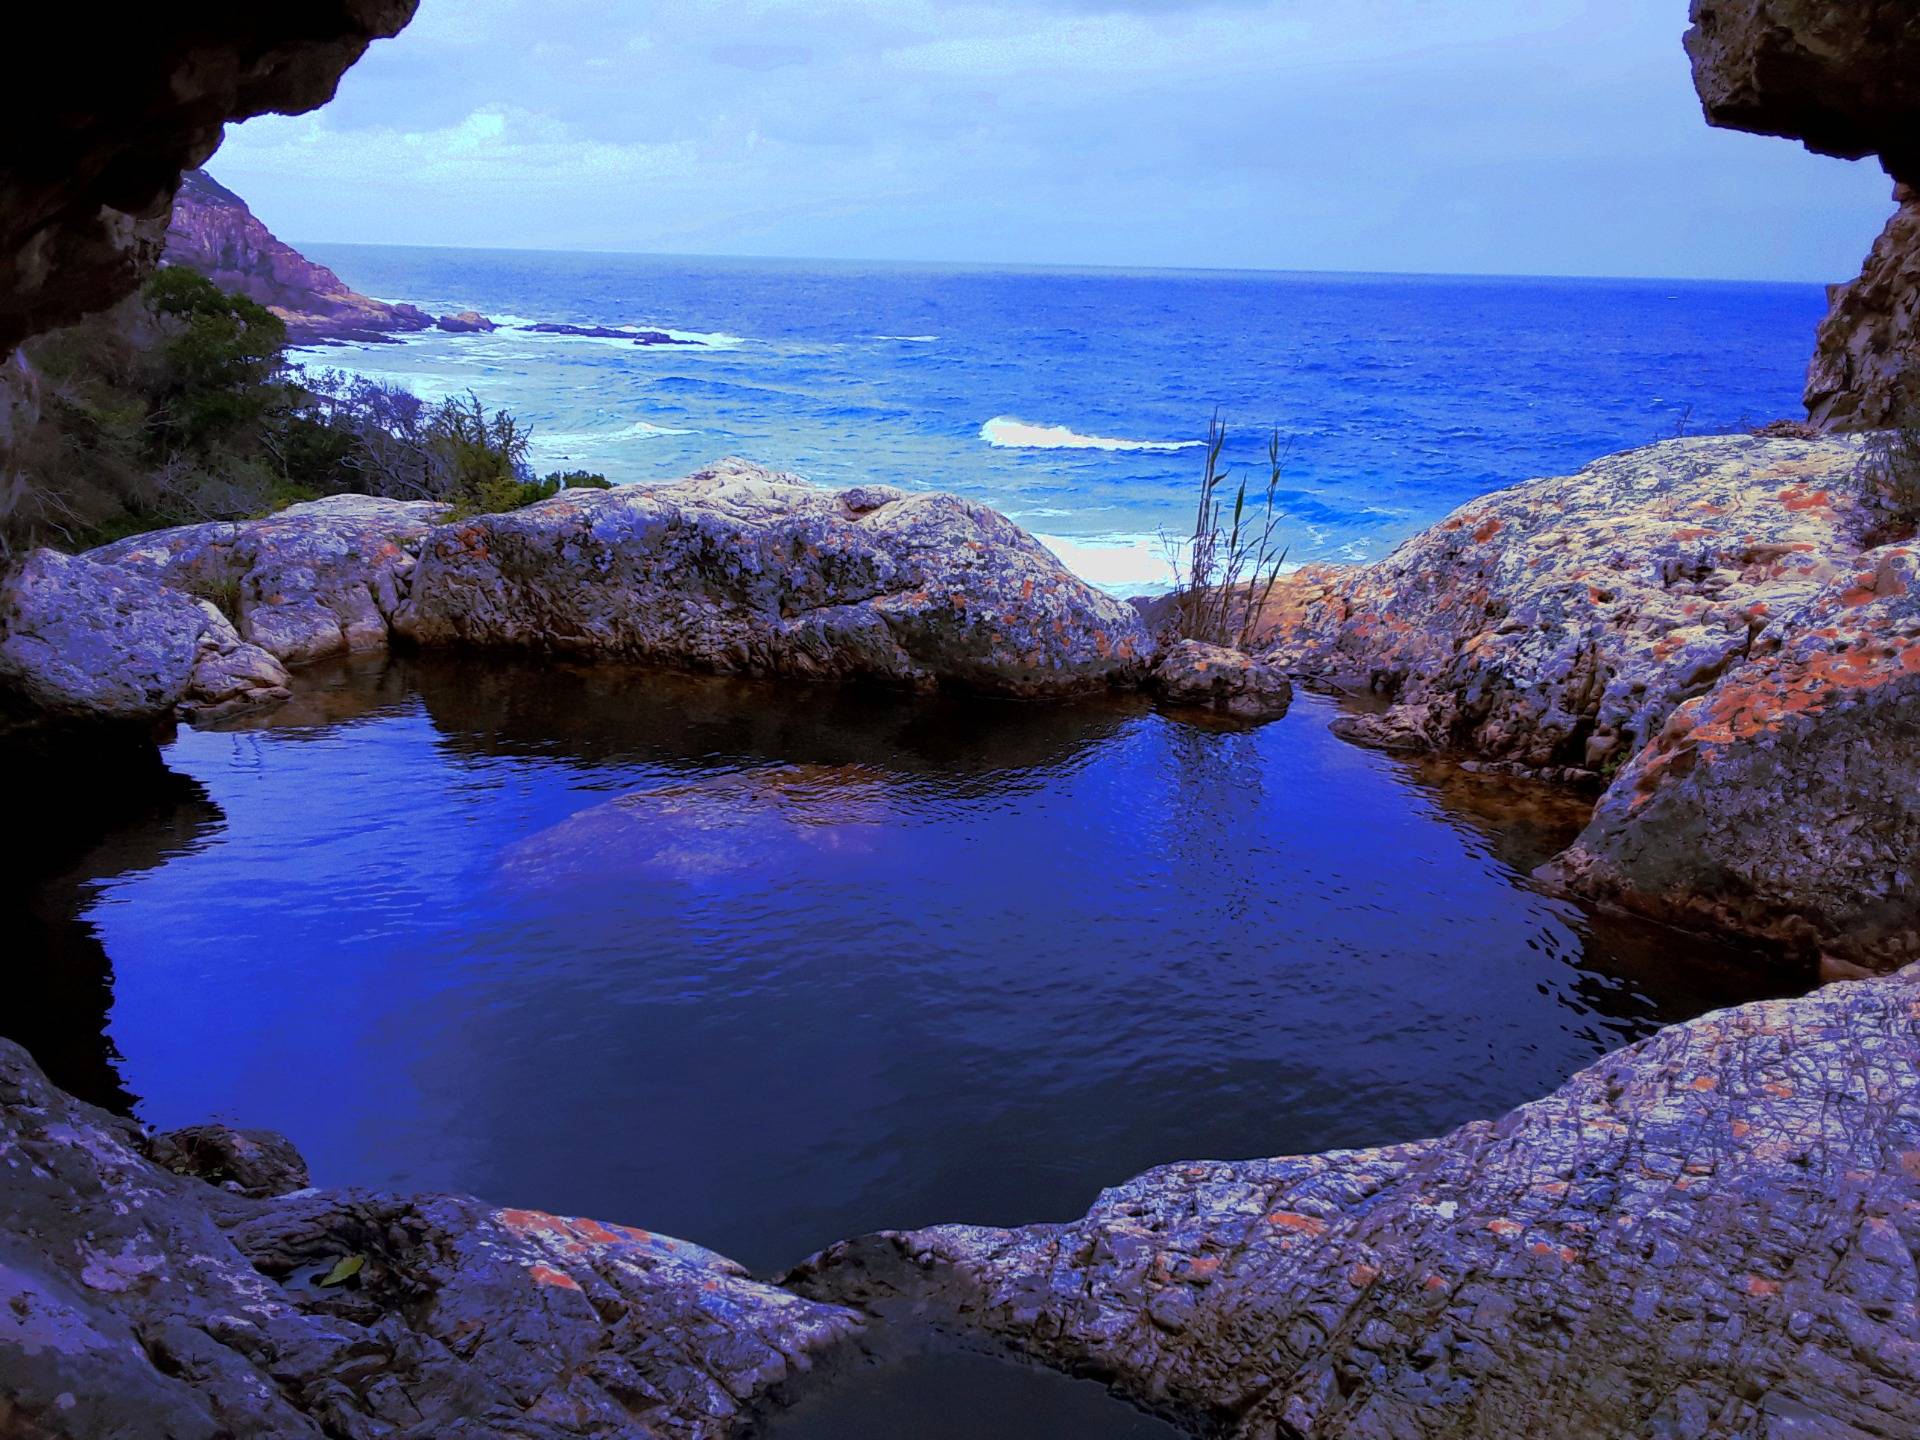 A bath with a view - discovering a treasure hideaway rock pool in the Garden Route, South Africa